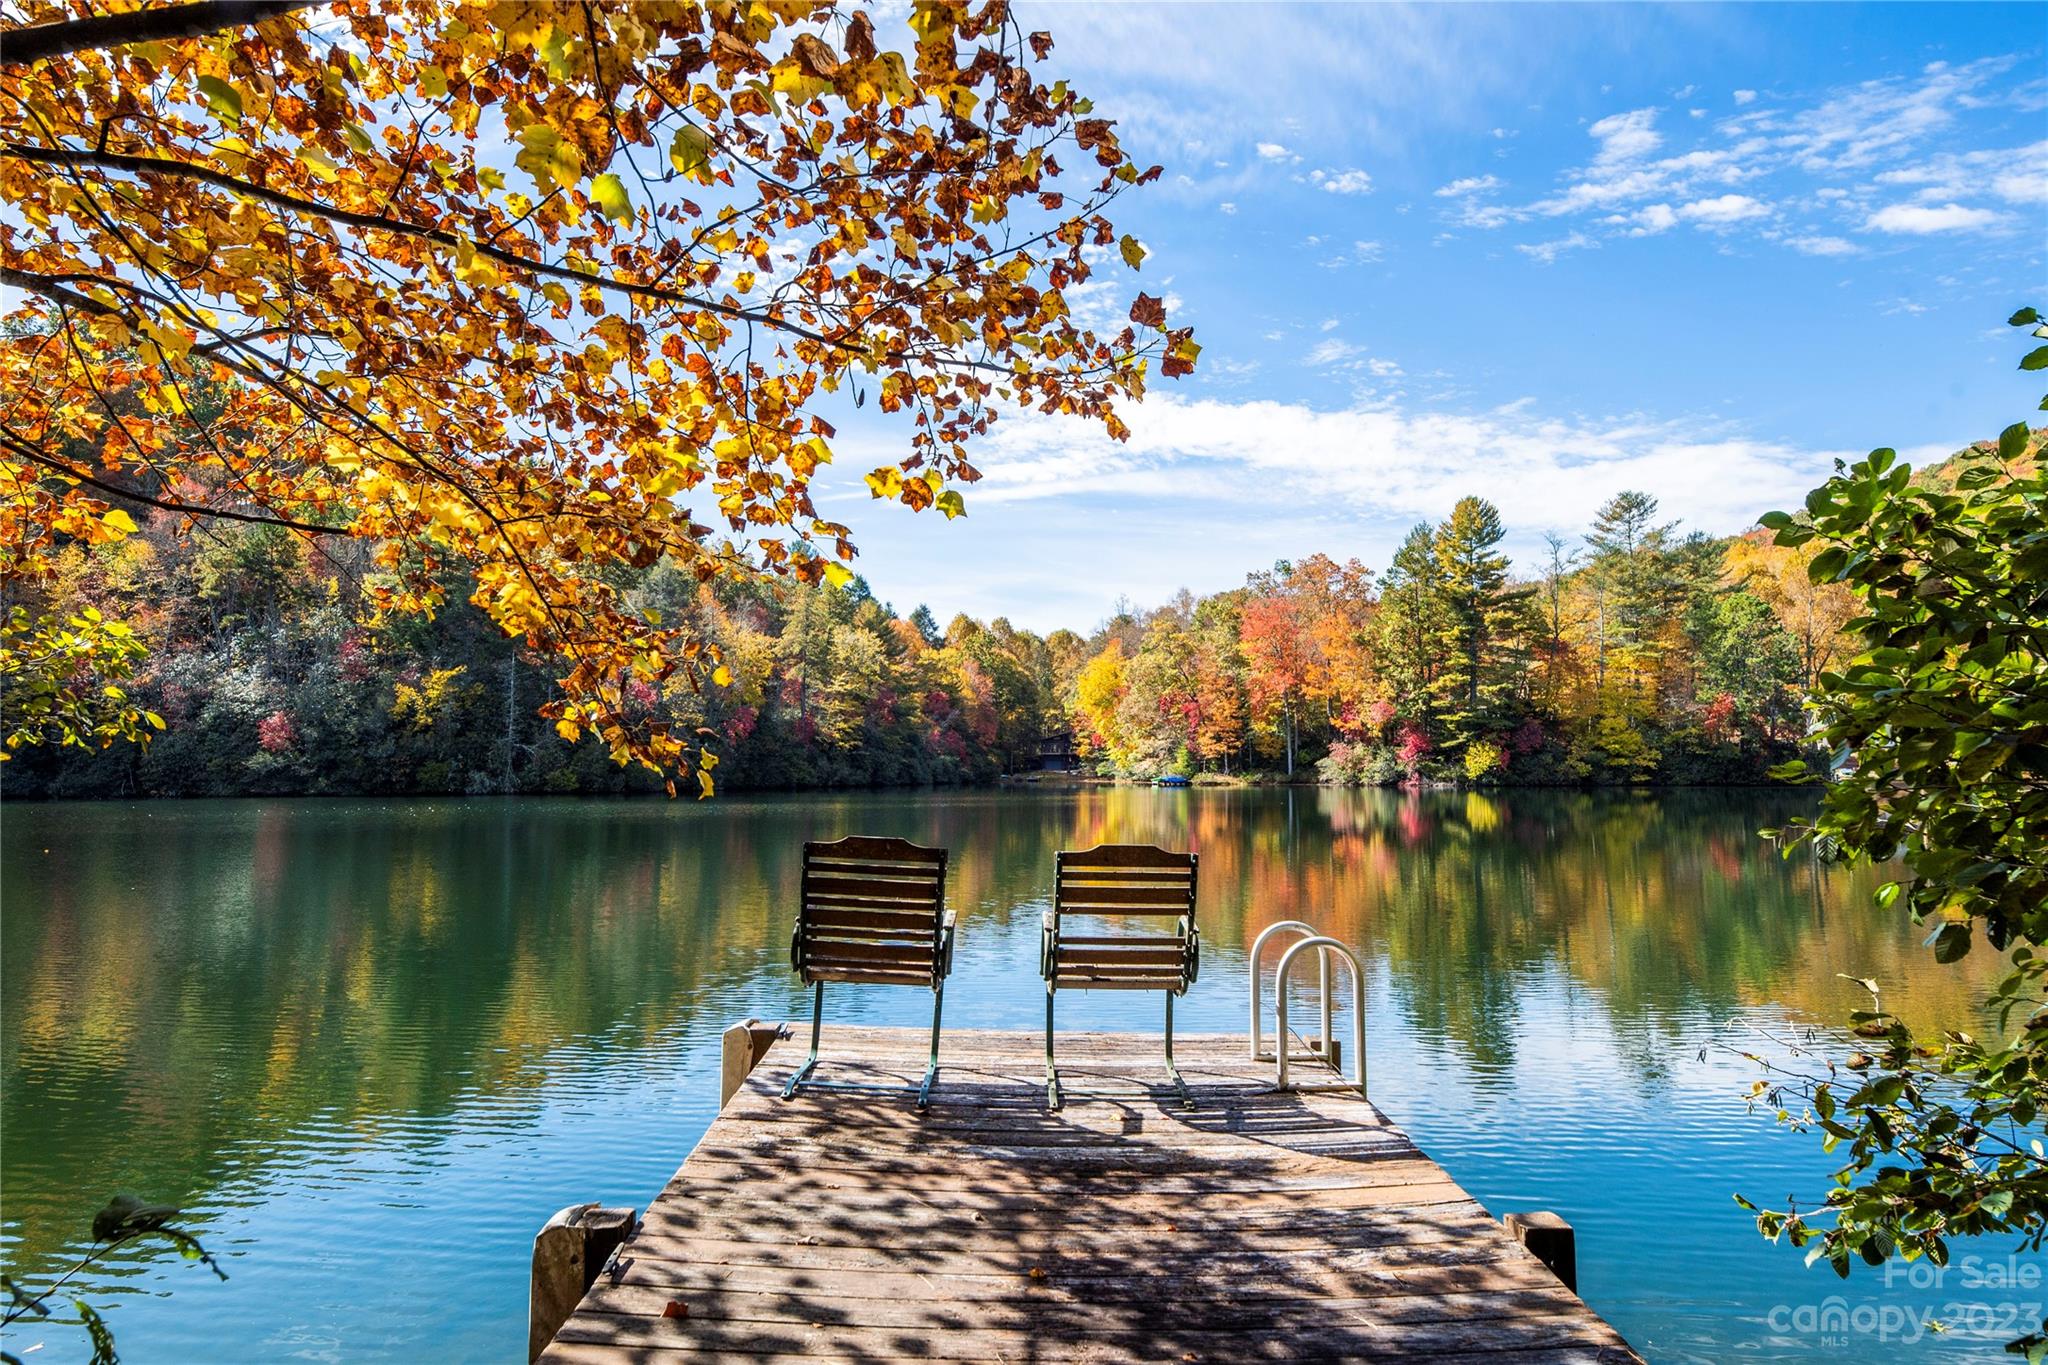 a wooden bench sitting next to a lake